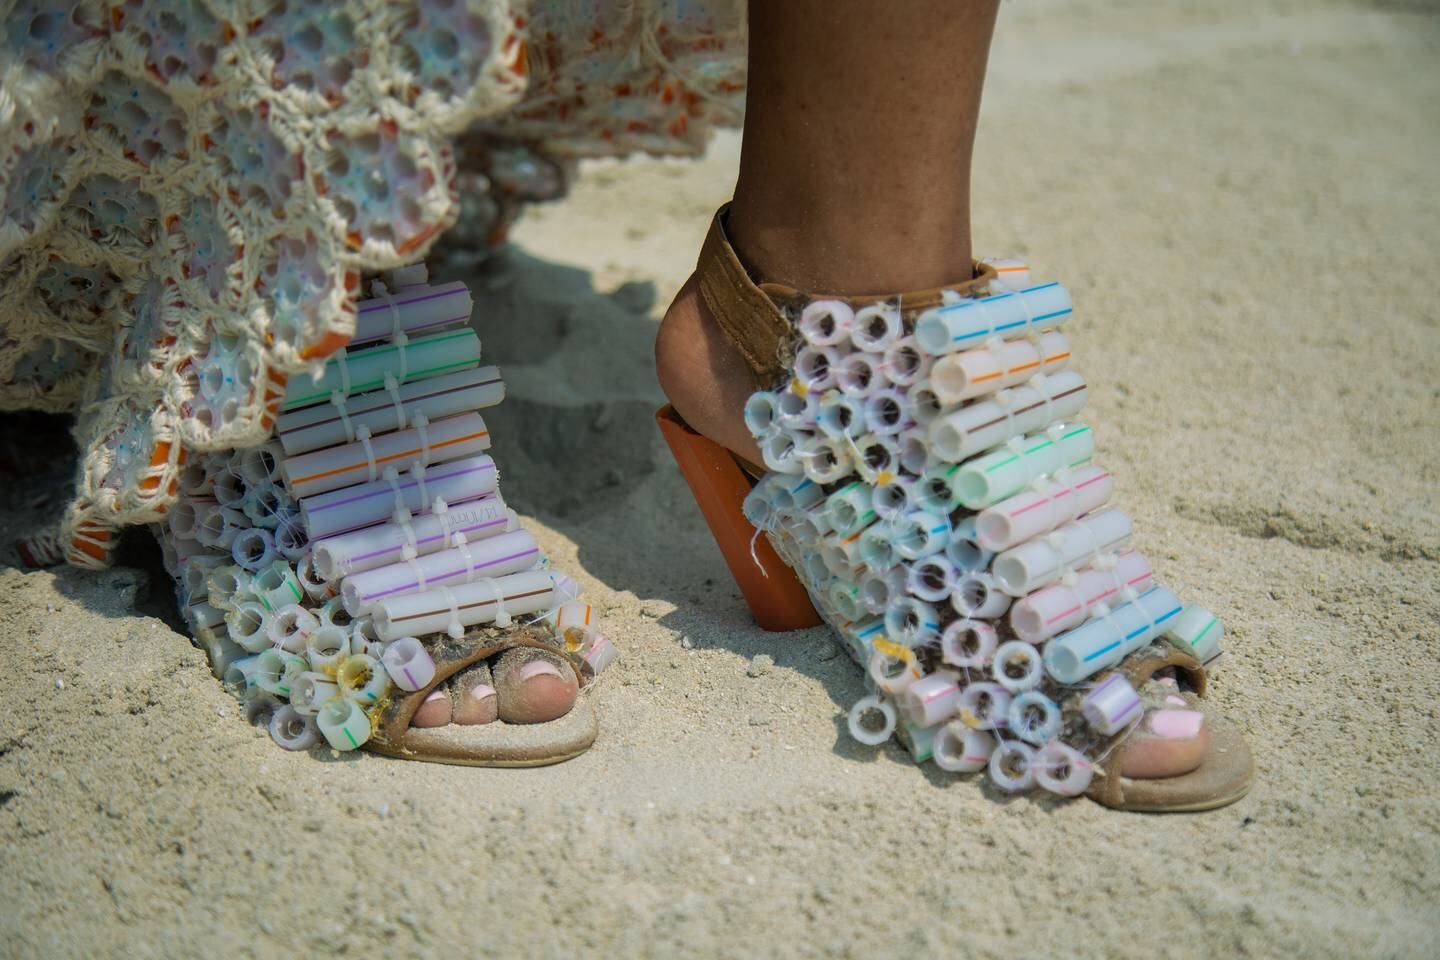 Shoes made by Sandra, one of the students taking part in Junk Kouture UAE. Photo: Junk Kouture